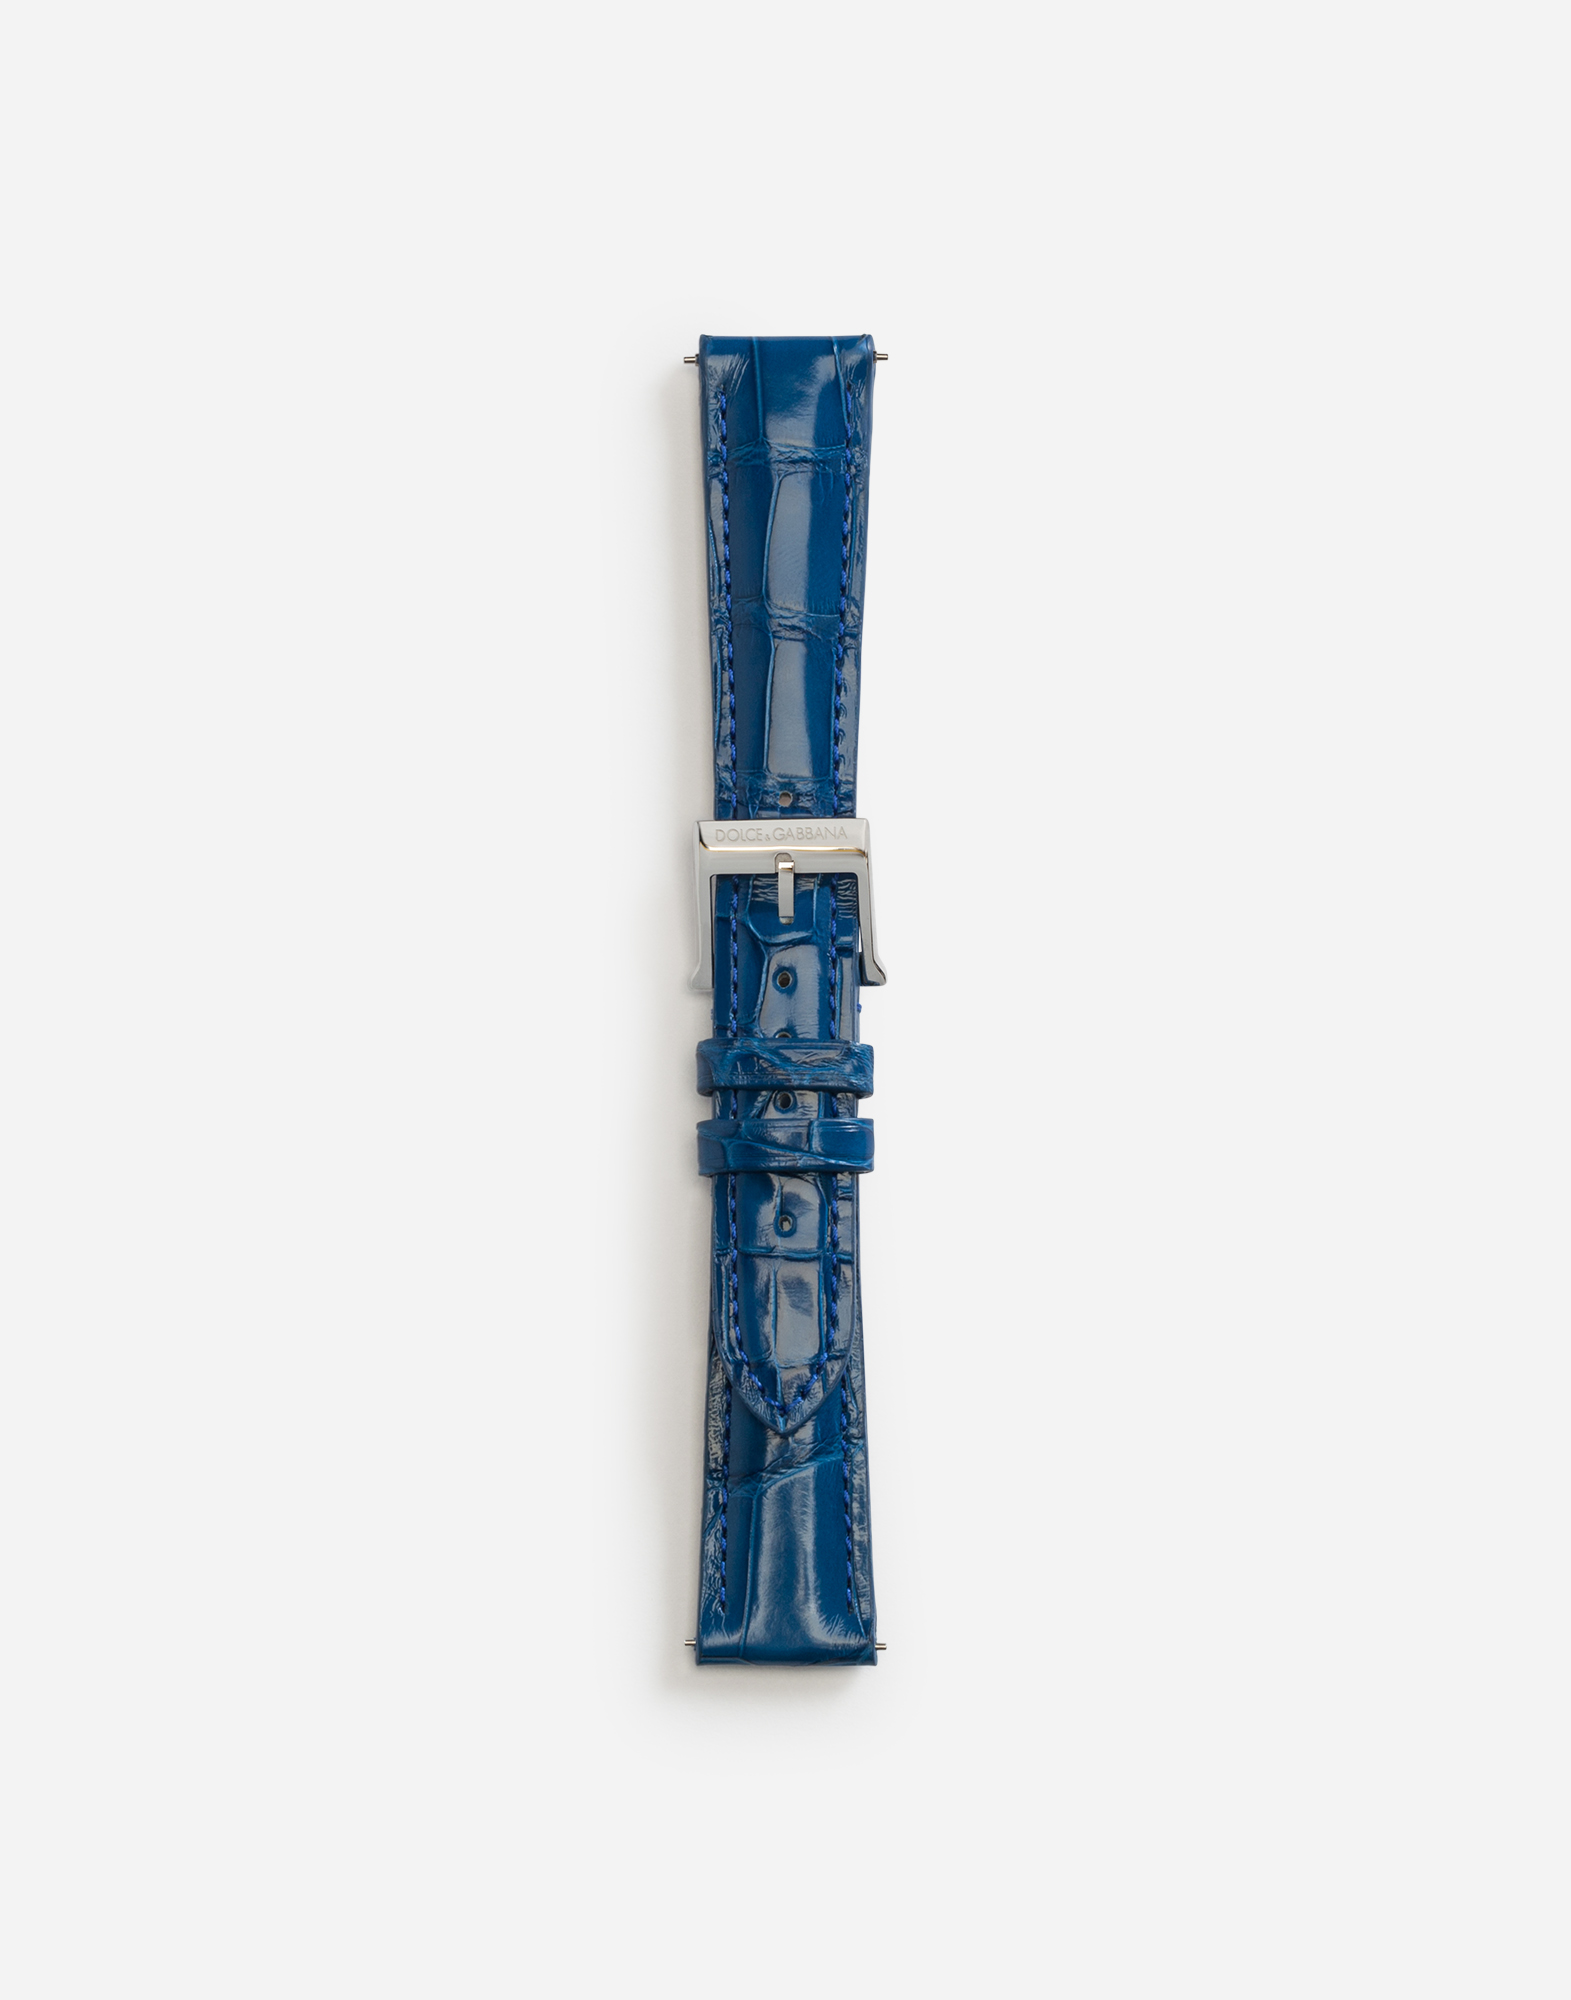 Alligator strap with buckle and hook in steel in Navy Blue